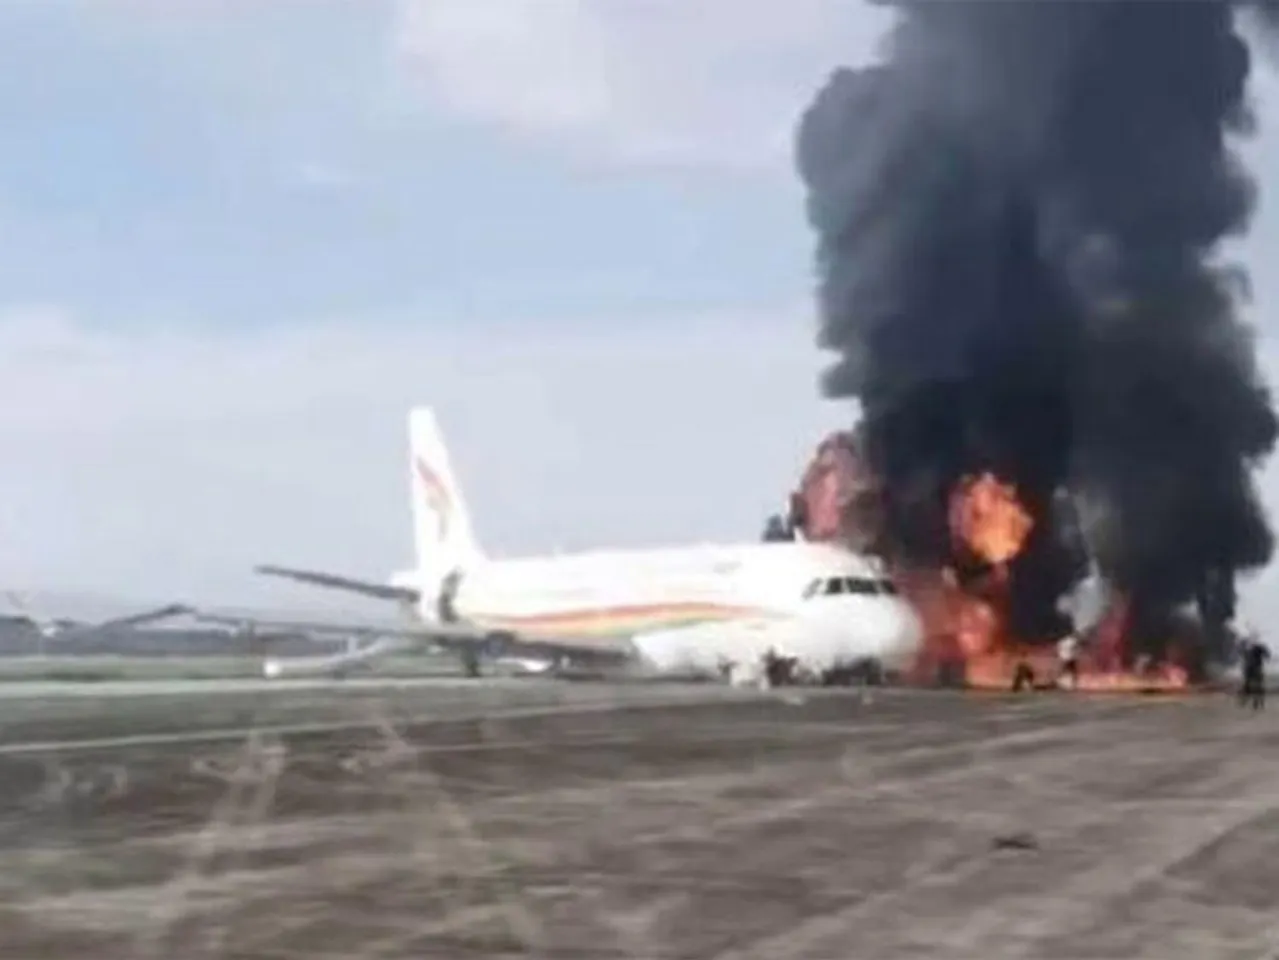 Tibet Airlines plane catches fire after falling off runway